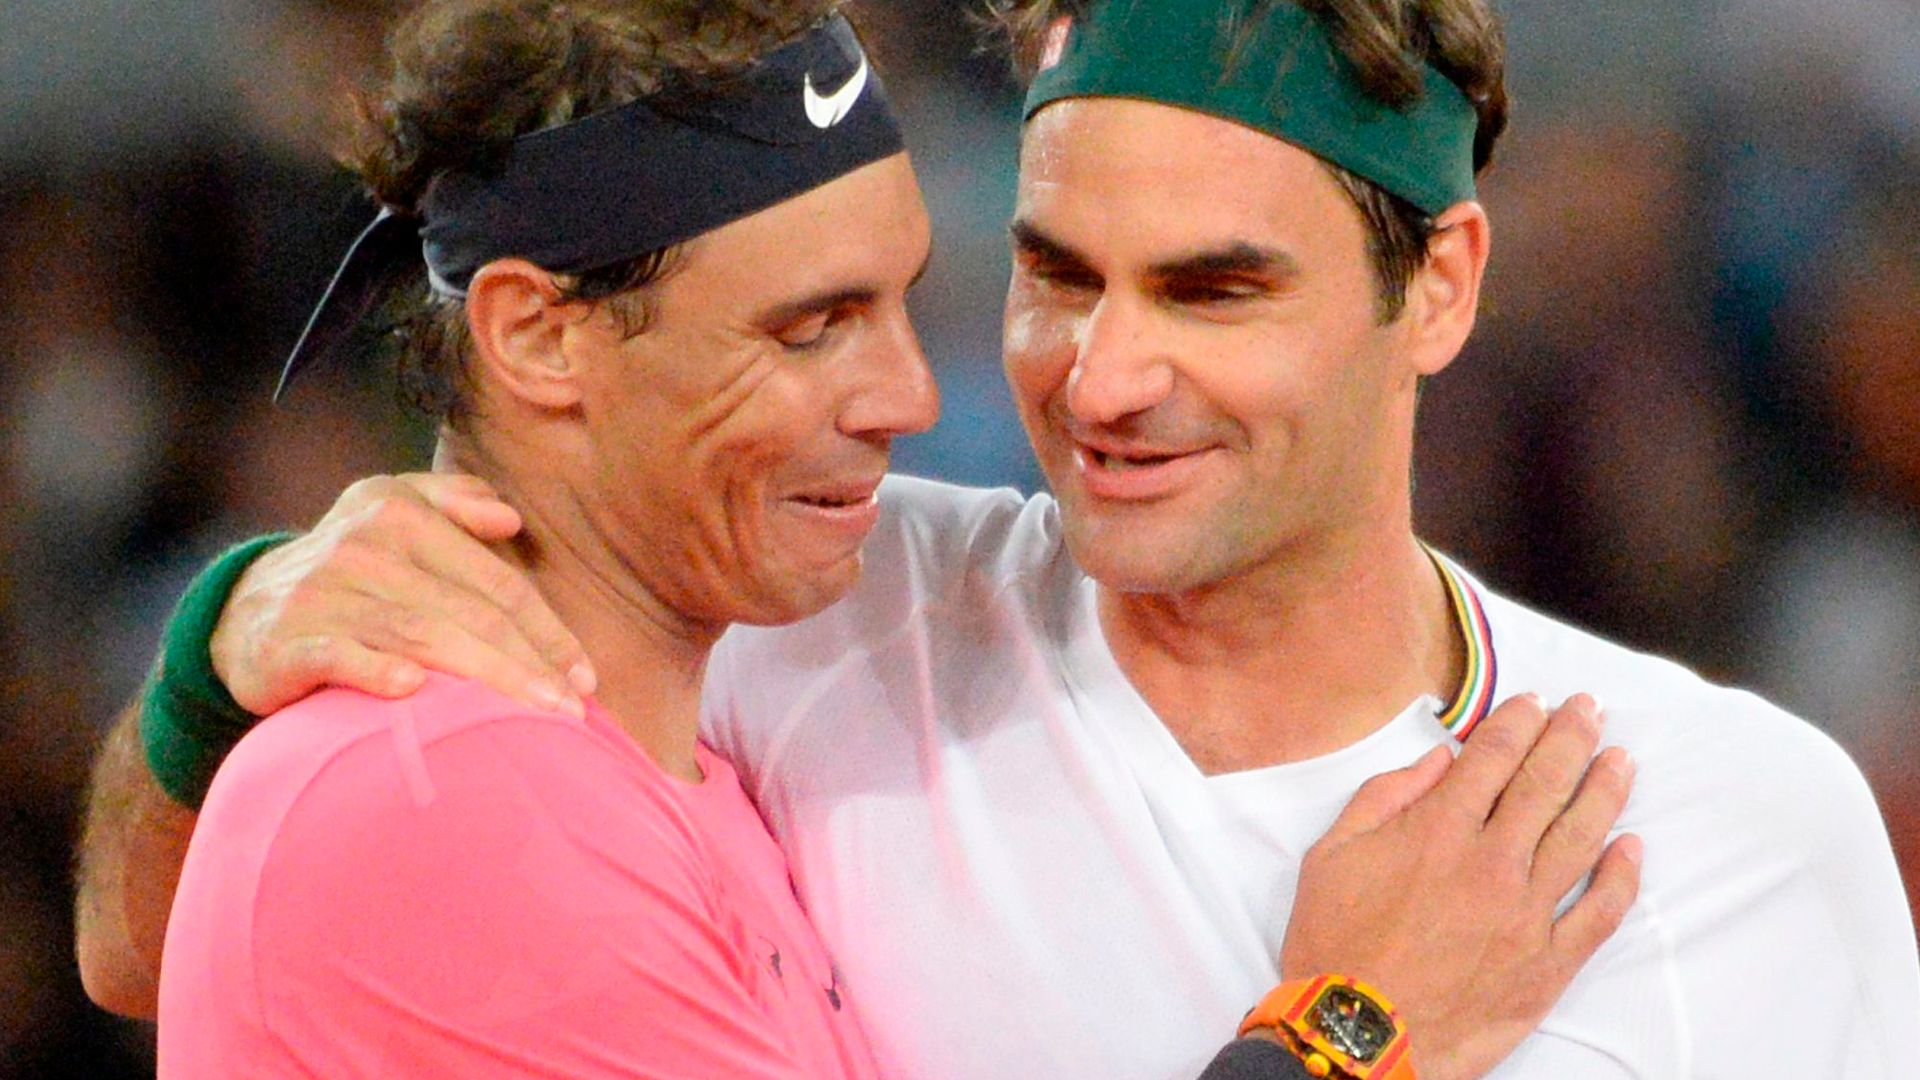 Federer will play final match alongside Nadal | 'The most beautiful thing'